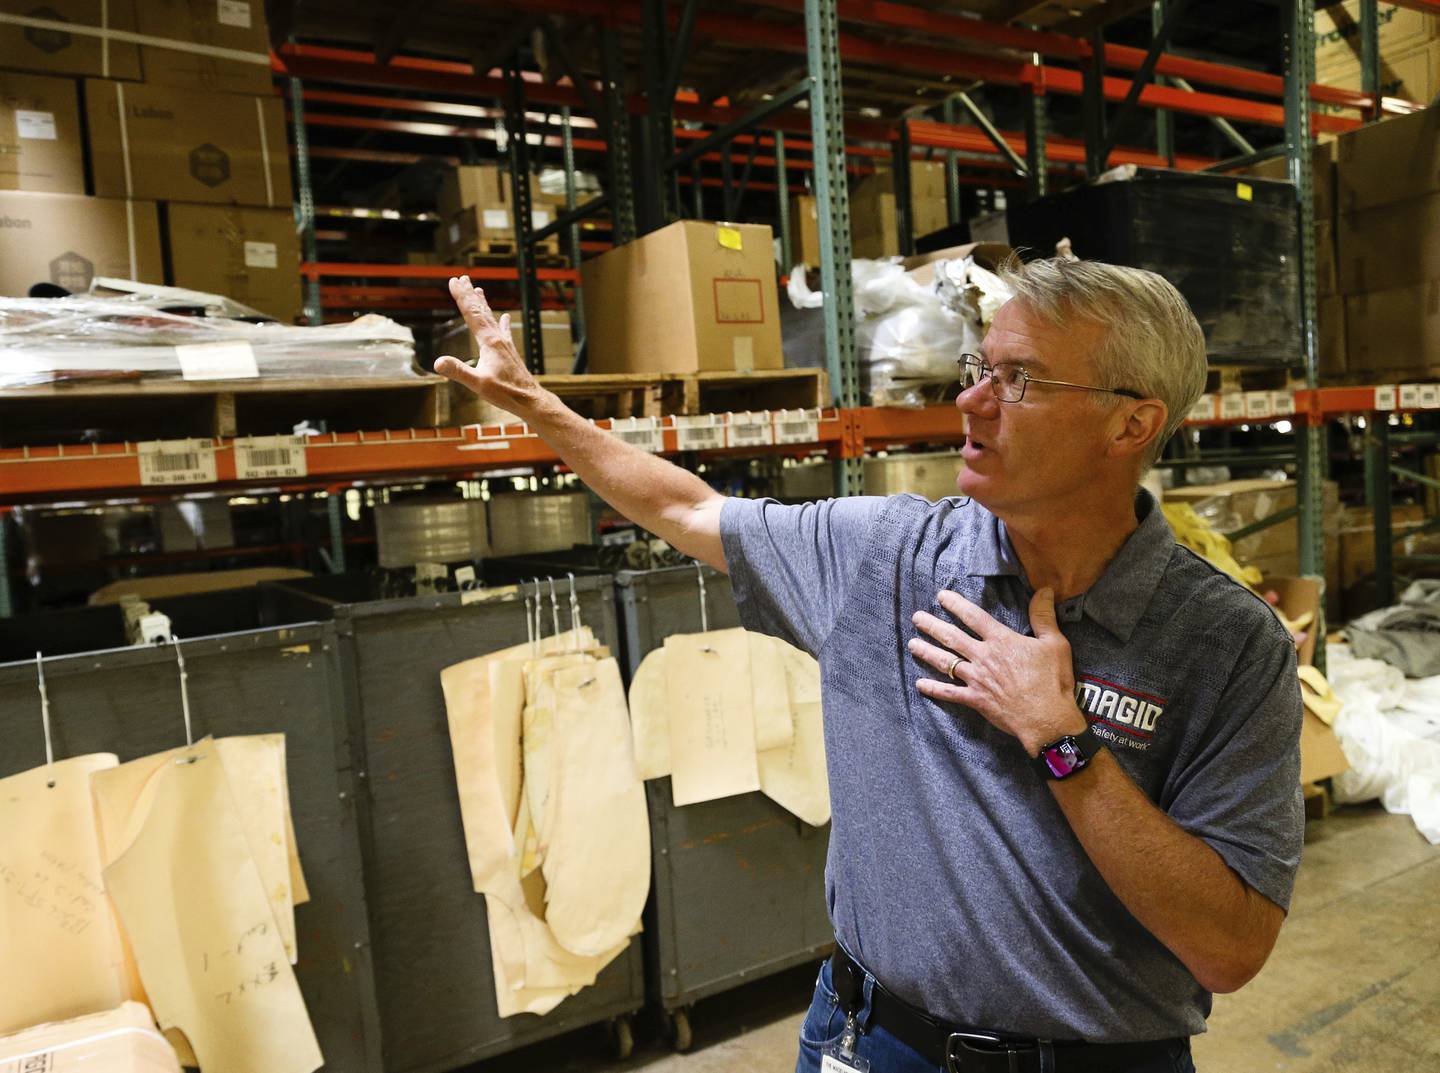 Dave Forberg, Magid Safety's vice president of operations, leads a tour around Magid's manufacturing facility and warehouse at their Romeoville headquarters on Sept. 8, 2022.